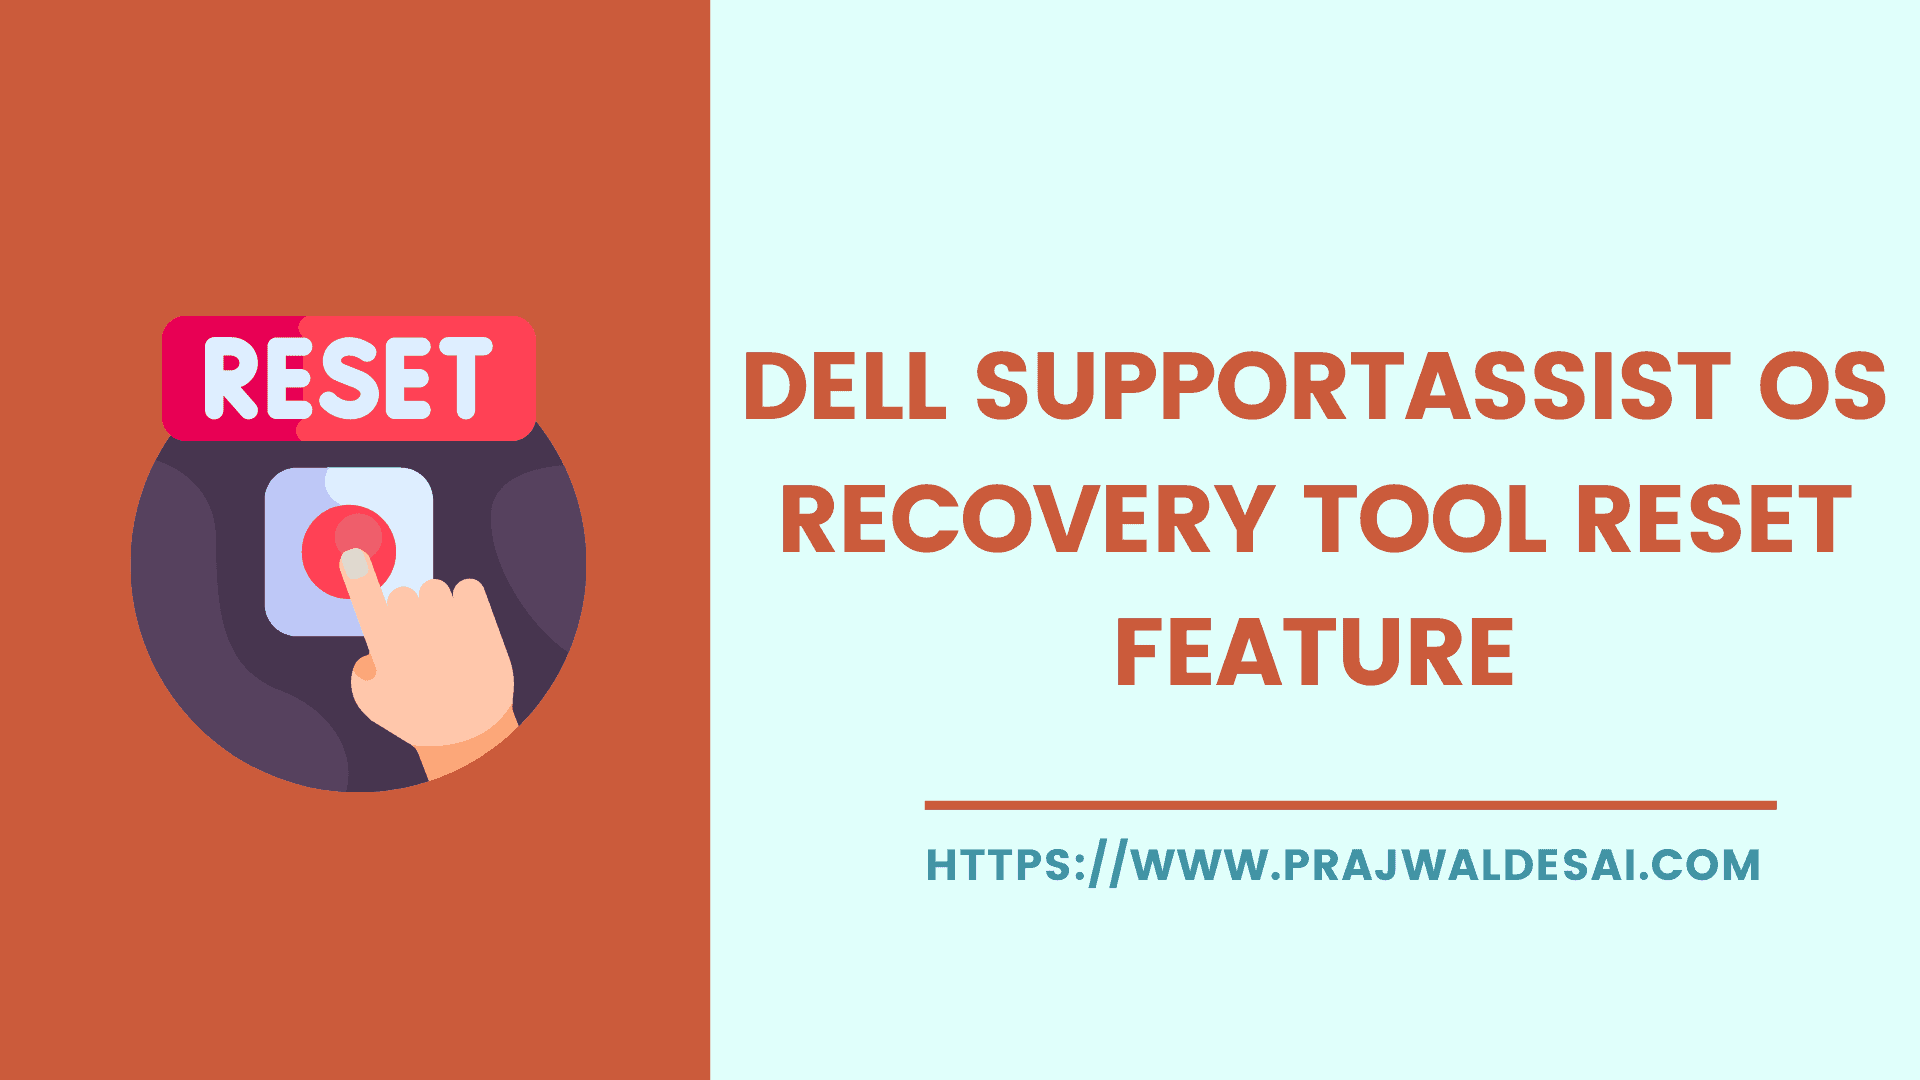 How To Use Dell SupportAssist OS Recovery Reset Feature